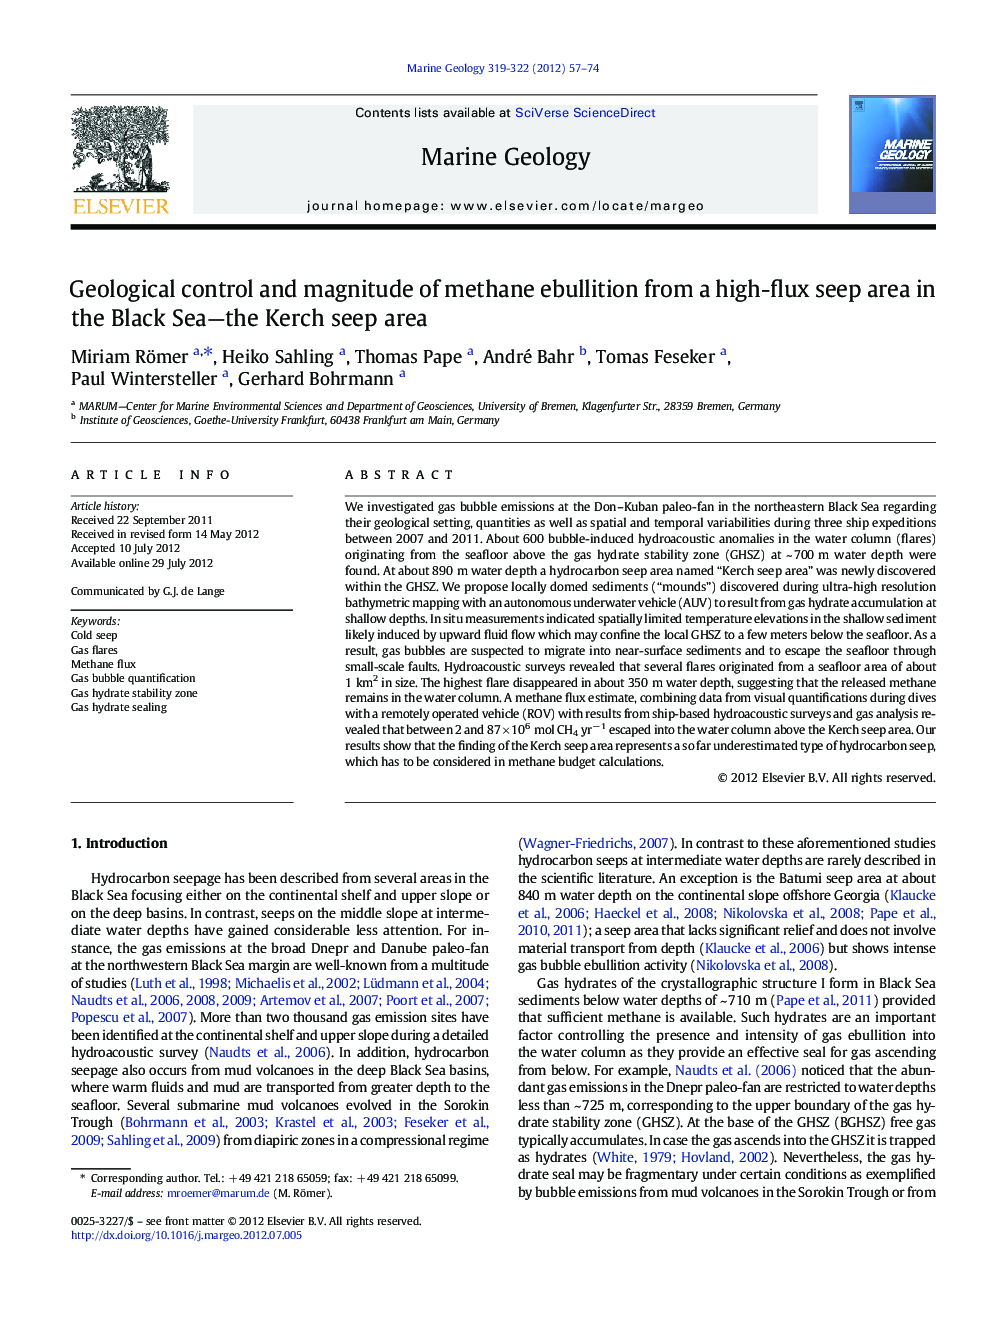 Geological control and magnitude of methane ebullition from a high-flux seep area in the Black Sea-the Kerch seep area